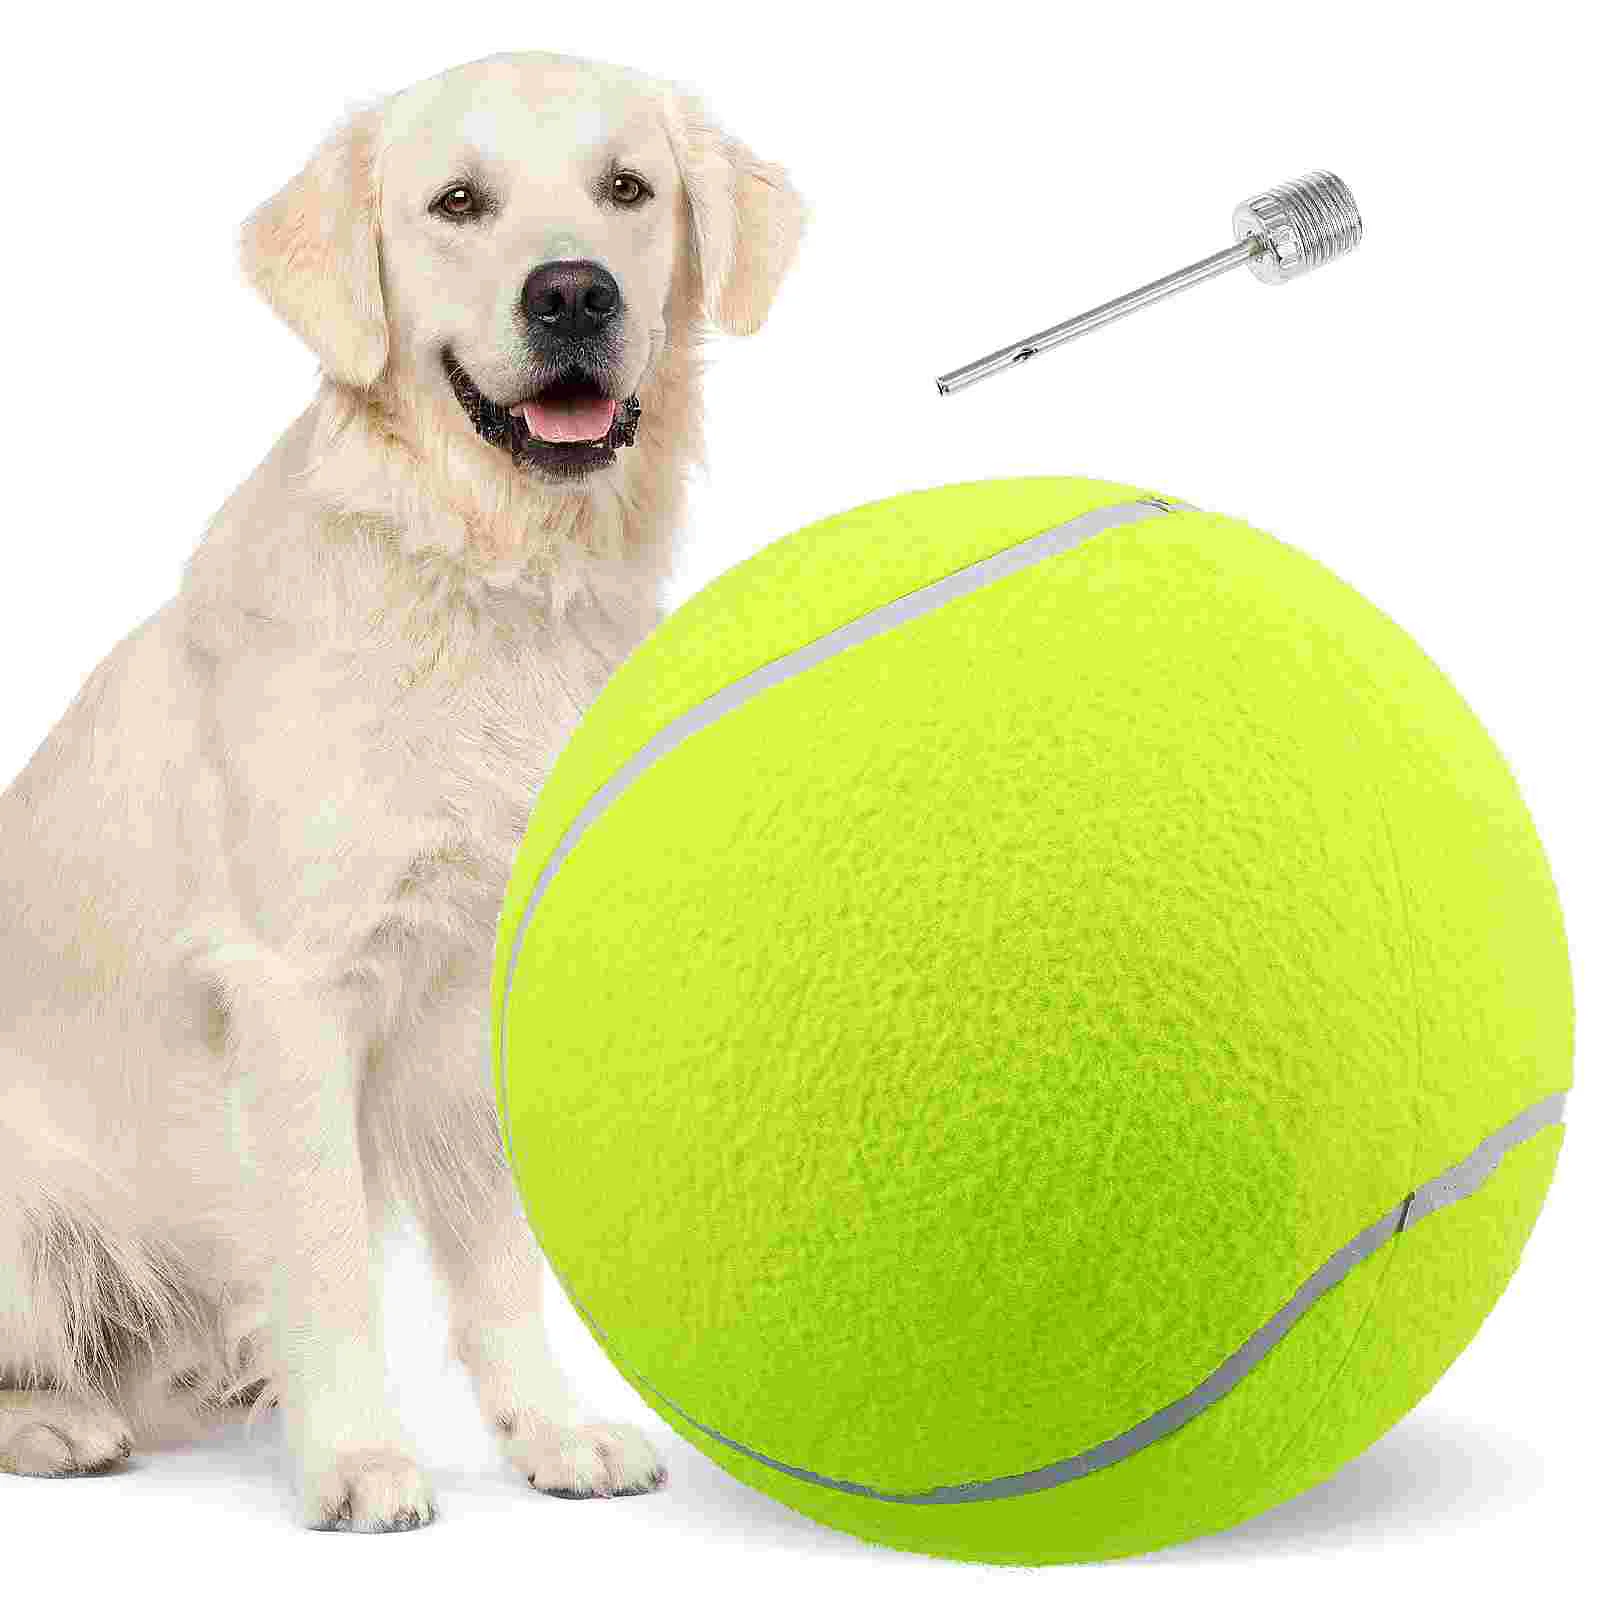 

95-inch Giant Tennis Ball for Large Pet Toys / Outdoor / Sports / Beach